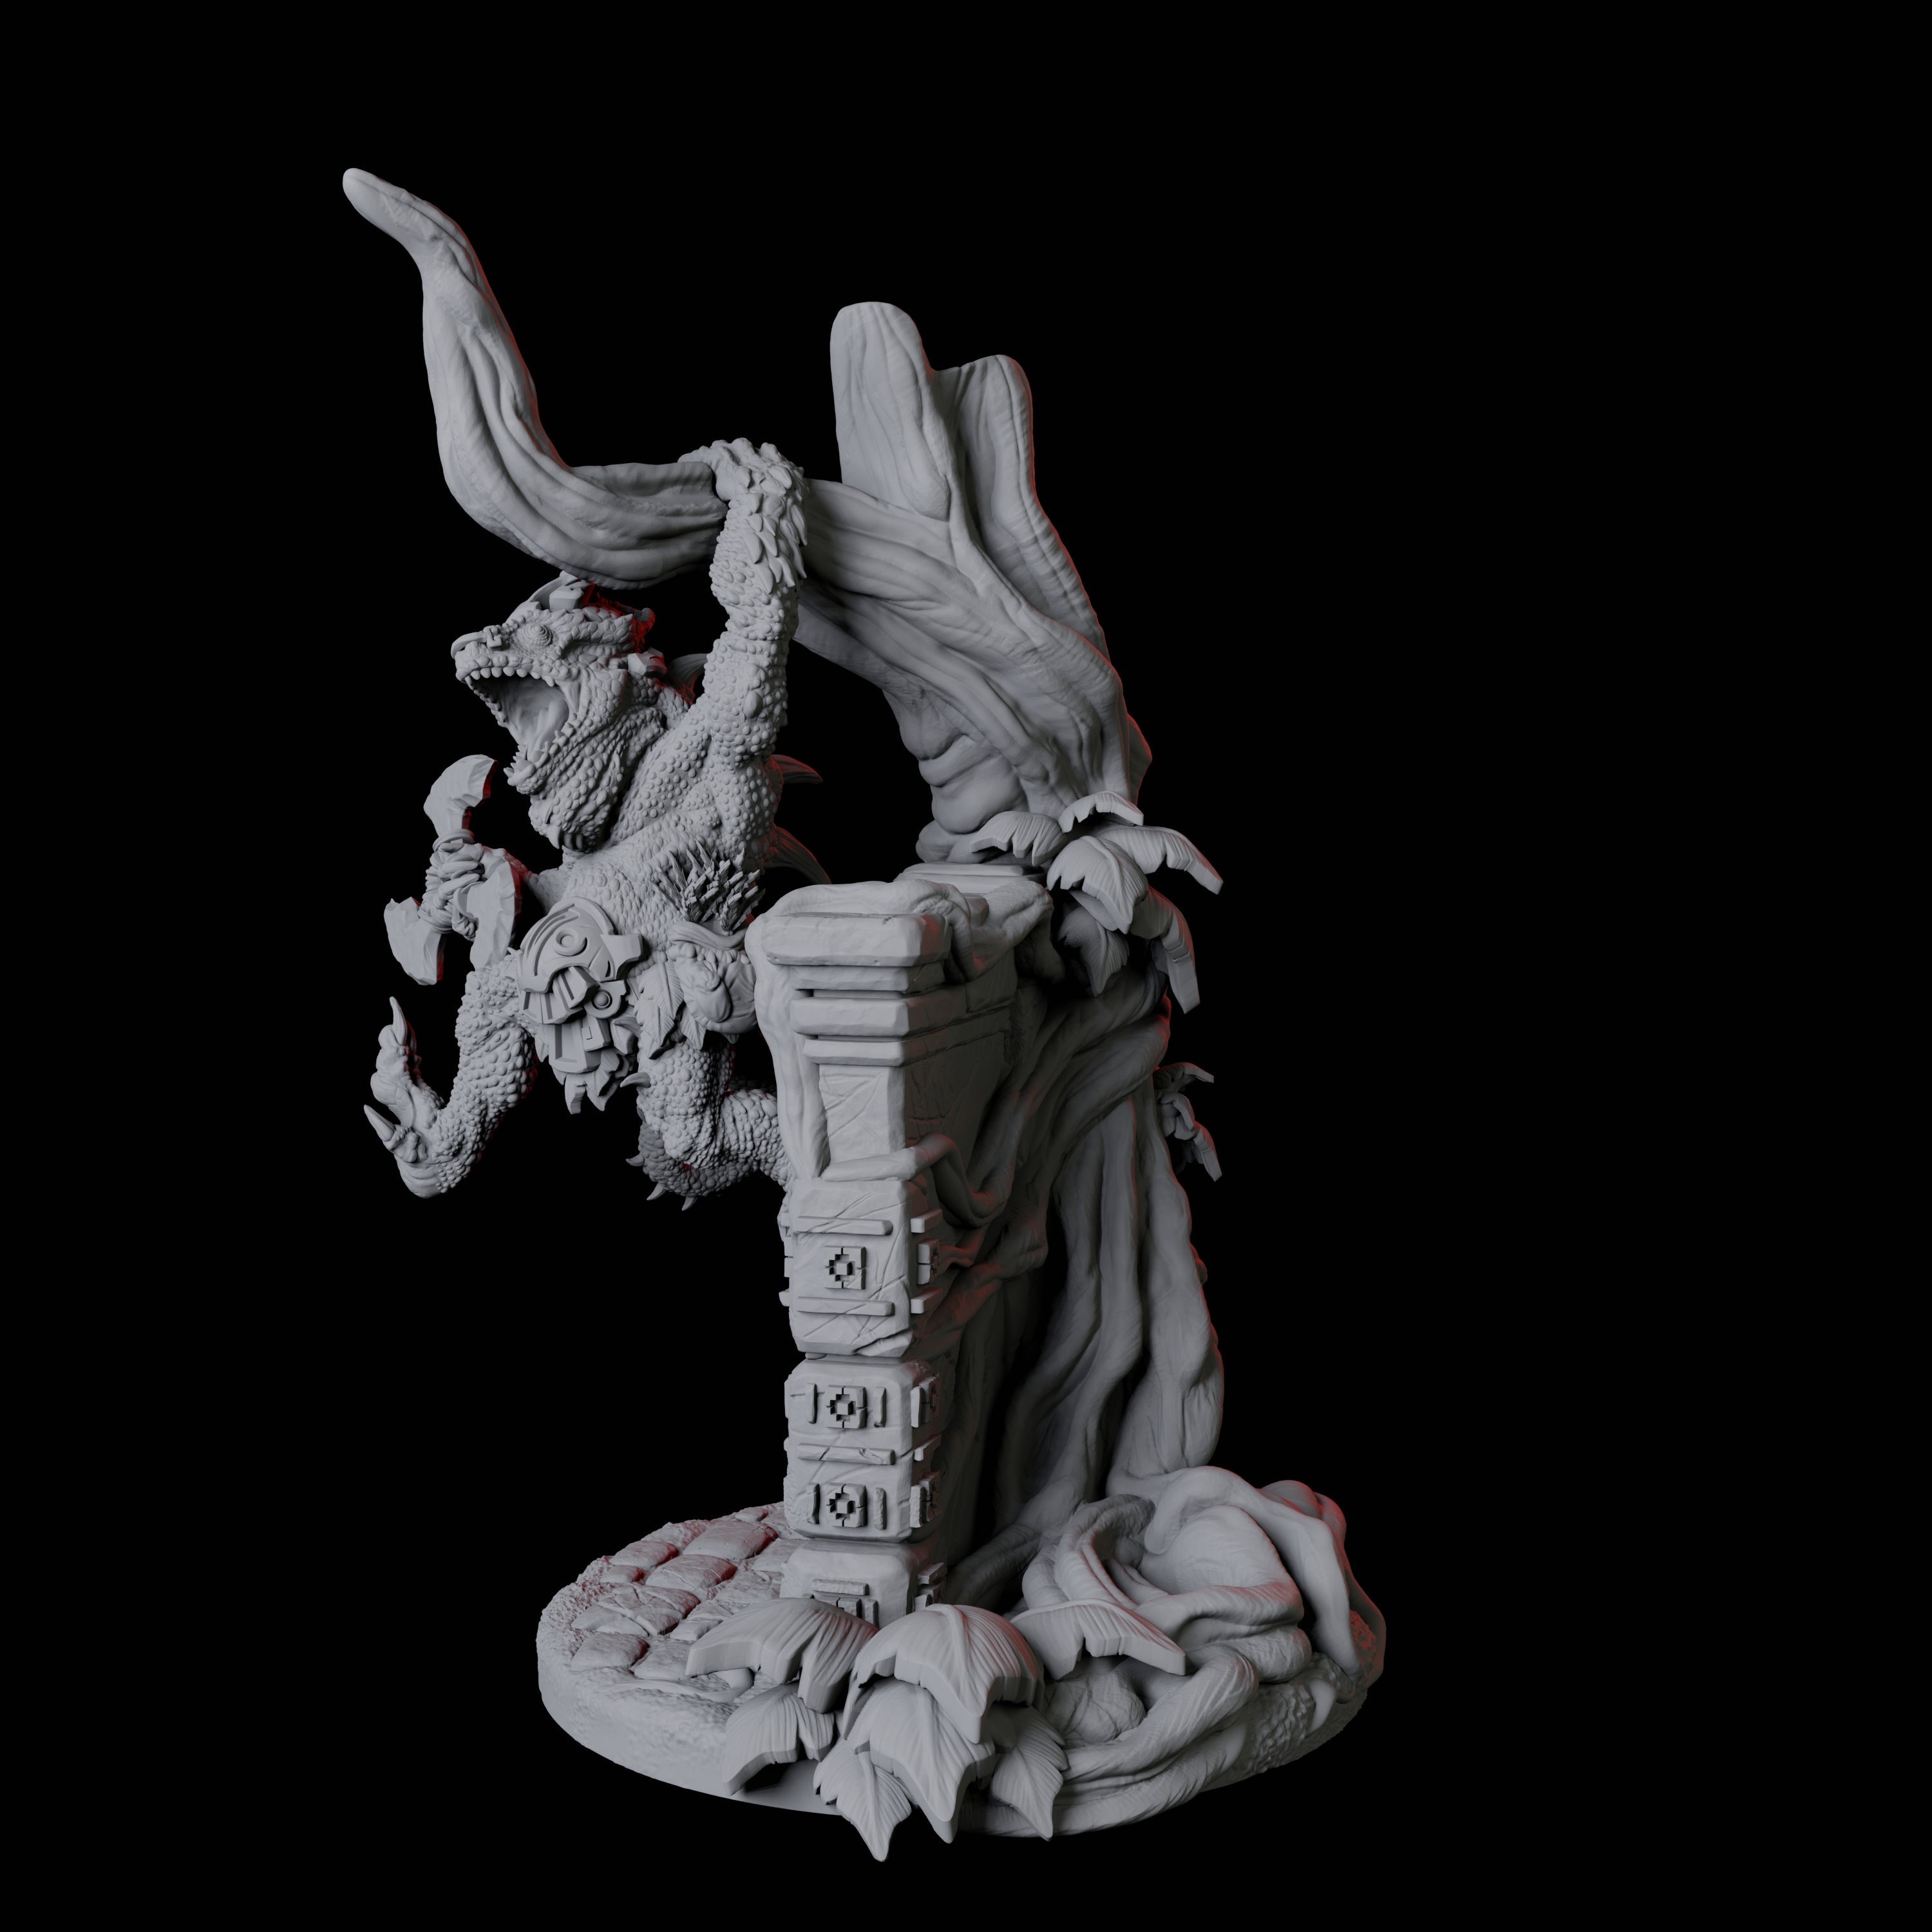 Grung Rogue B Miniature for Dungeons and Dragons, Pathfinder or other TTRPGs